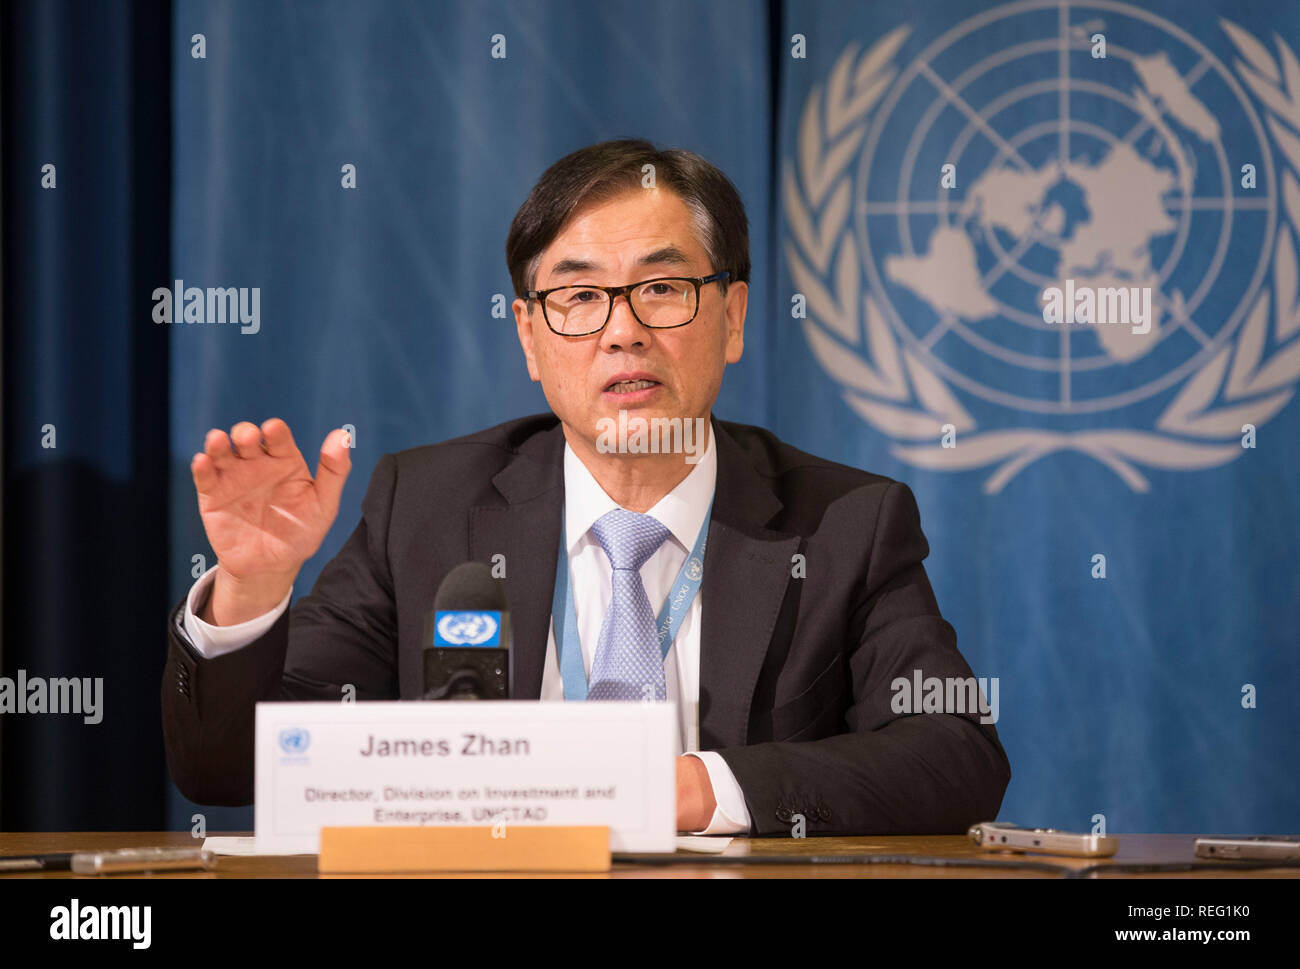 (190122) -- GENEVA, Jan. 22, 2019 (Xinhua) -- James Zhan, director of Investment and Enterprise of the UN Conference on Trade and Development (UNCTAD) attends the release conference of 2019 Investment Trends Monitor in Geneva, Switzerland, Jan. 18, 2019. Global foreign direct investment (FDI) flows continue their slide in 2018, a United Nations agency said Monday while noting that China, however, bucked that trend and was the largest investment recipient in the world. Global FDI fell by 19 percent in 2018 to an estimated 1.2 trillion U.S. dollars from 1.47 trillion dollars in 2017, said UNCTAD Stock Photo